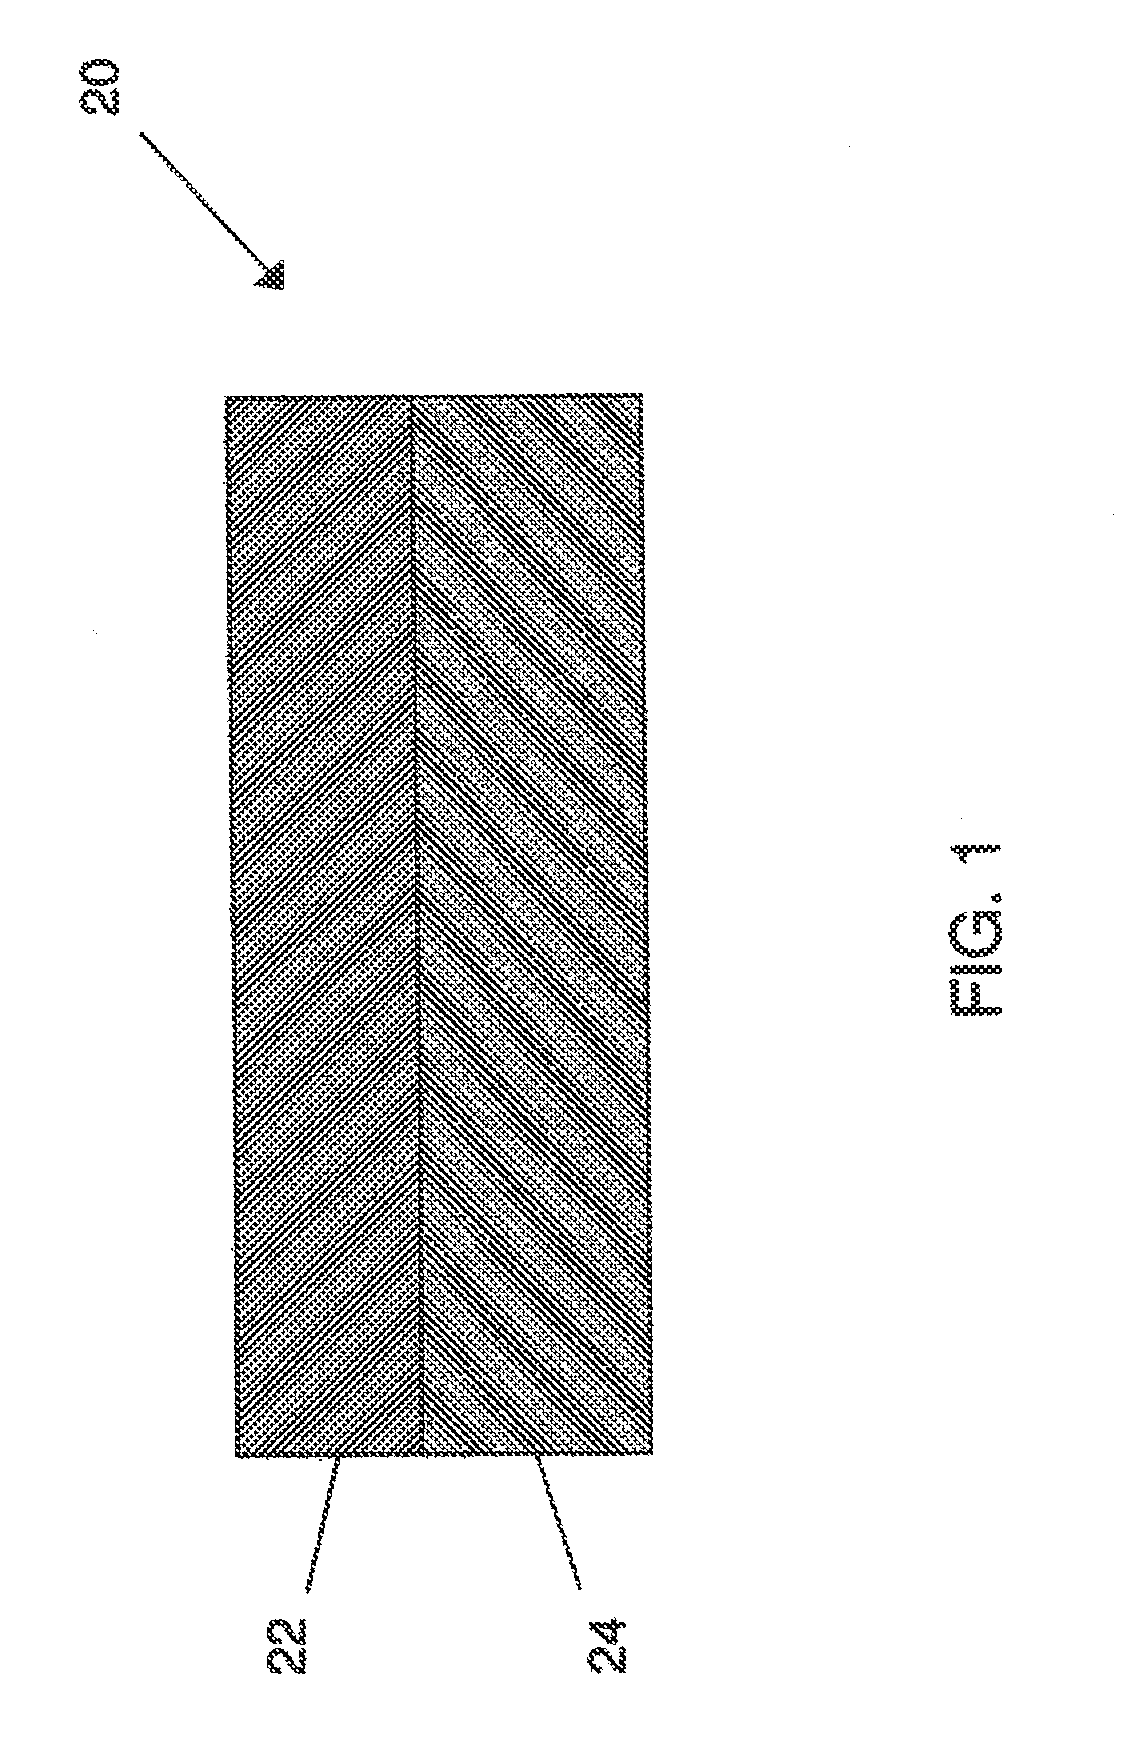 Renewably sourced films and methods of forming same